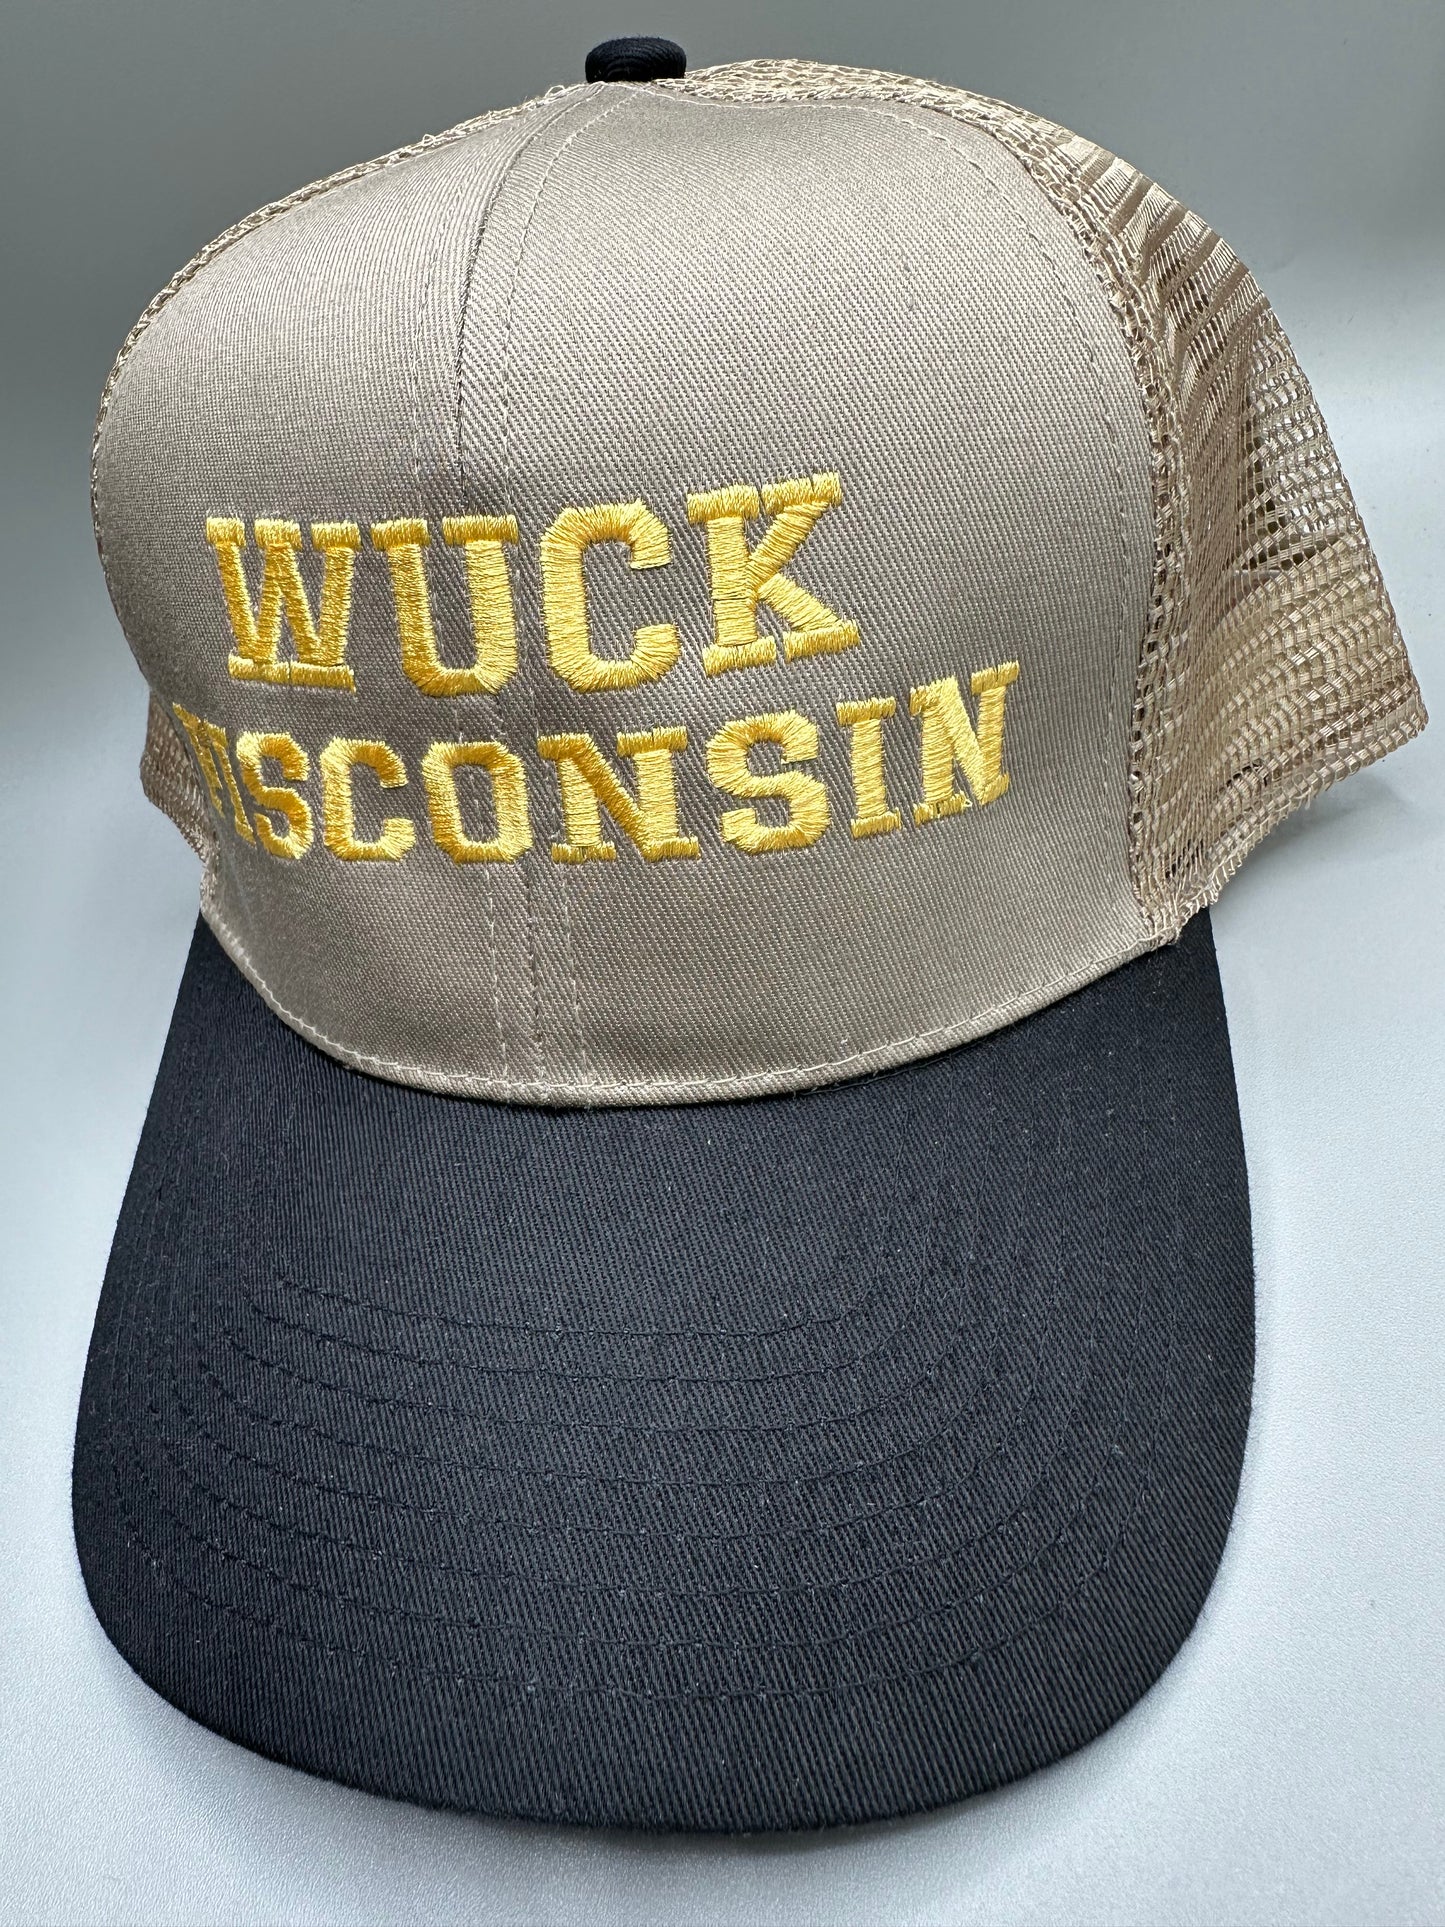 Wuck Fisconsin Game Day Snapback - Purdue